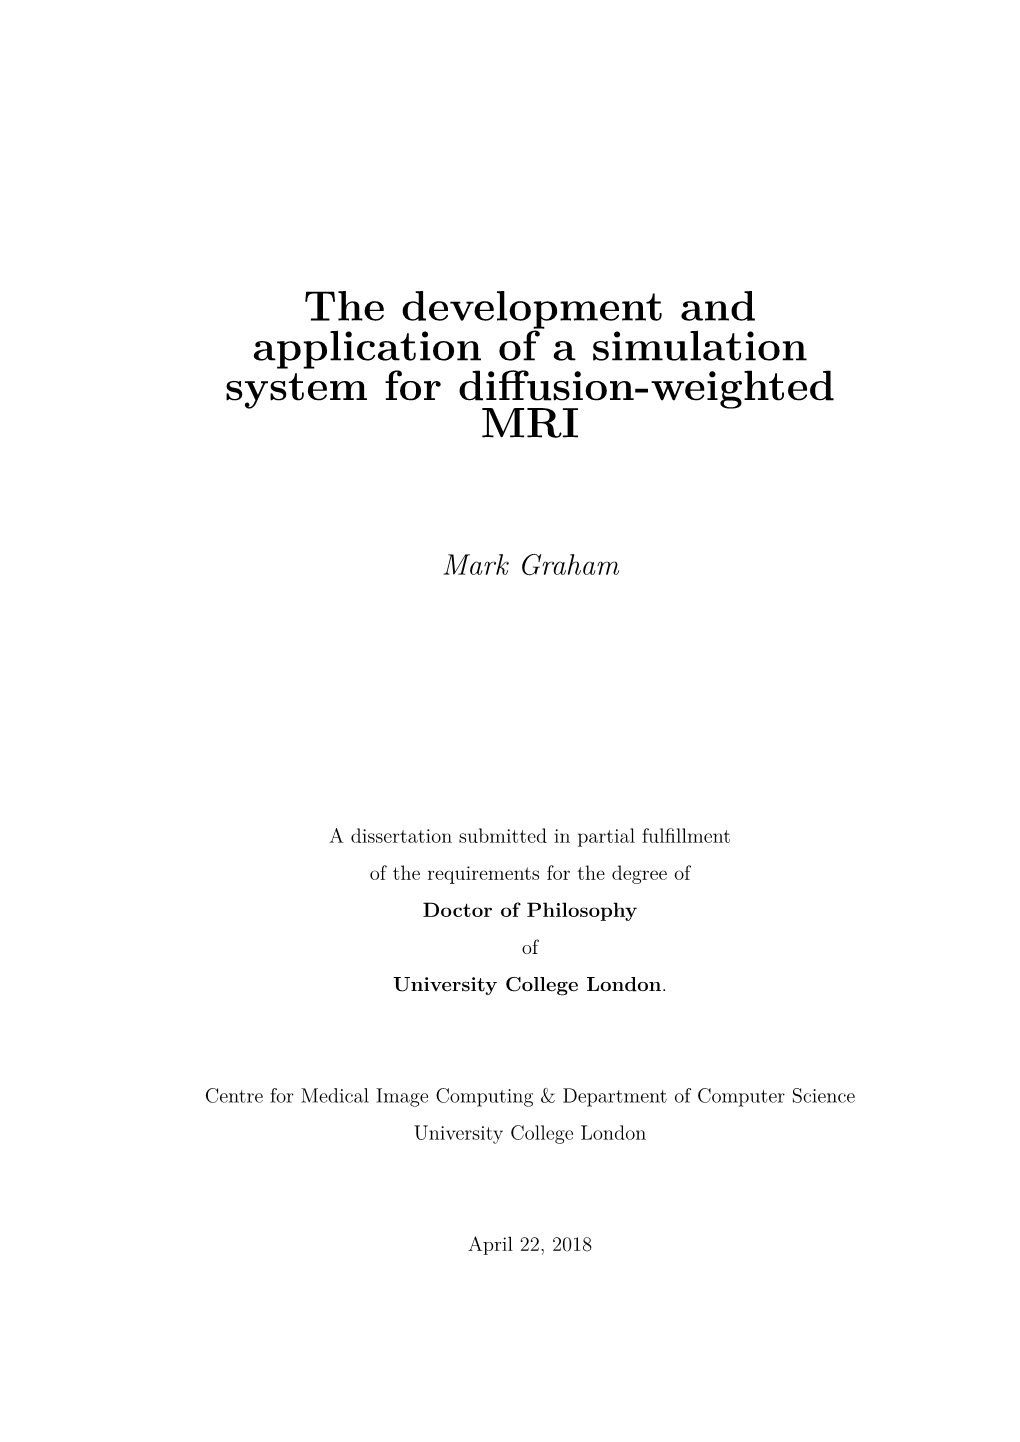 The Development and Application of a Simulation System for Diffusion